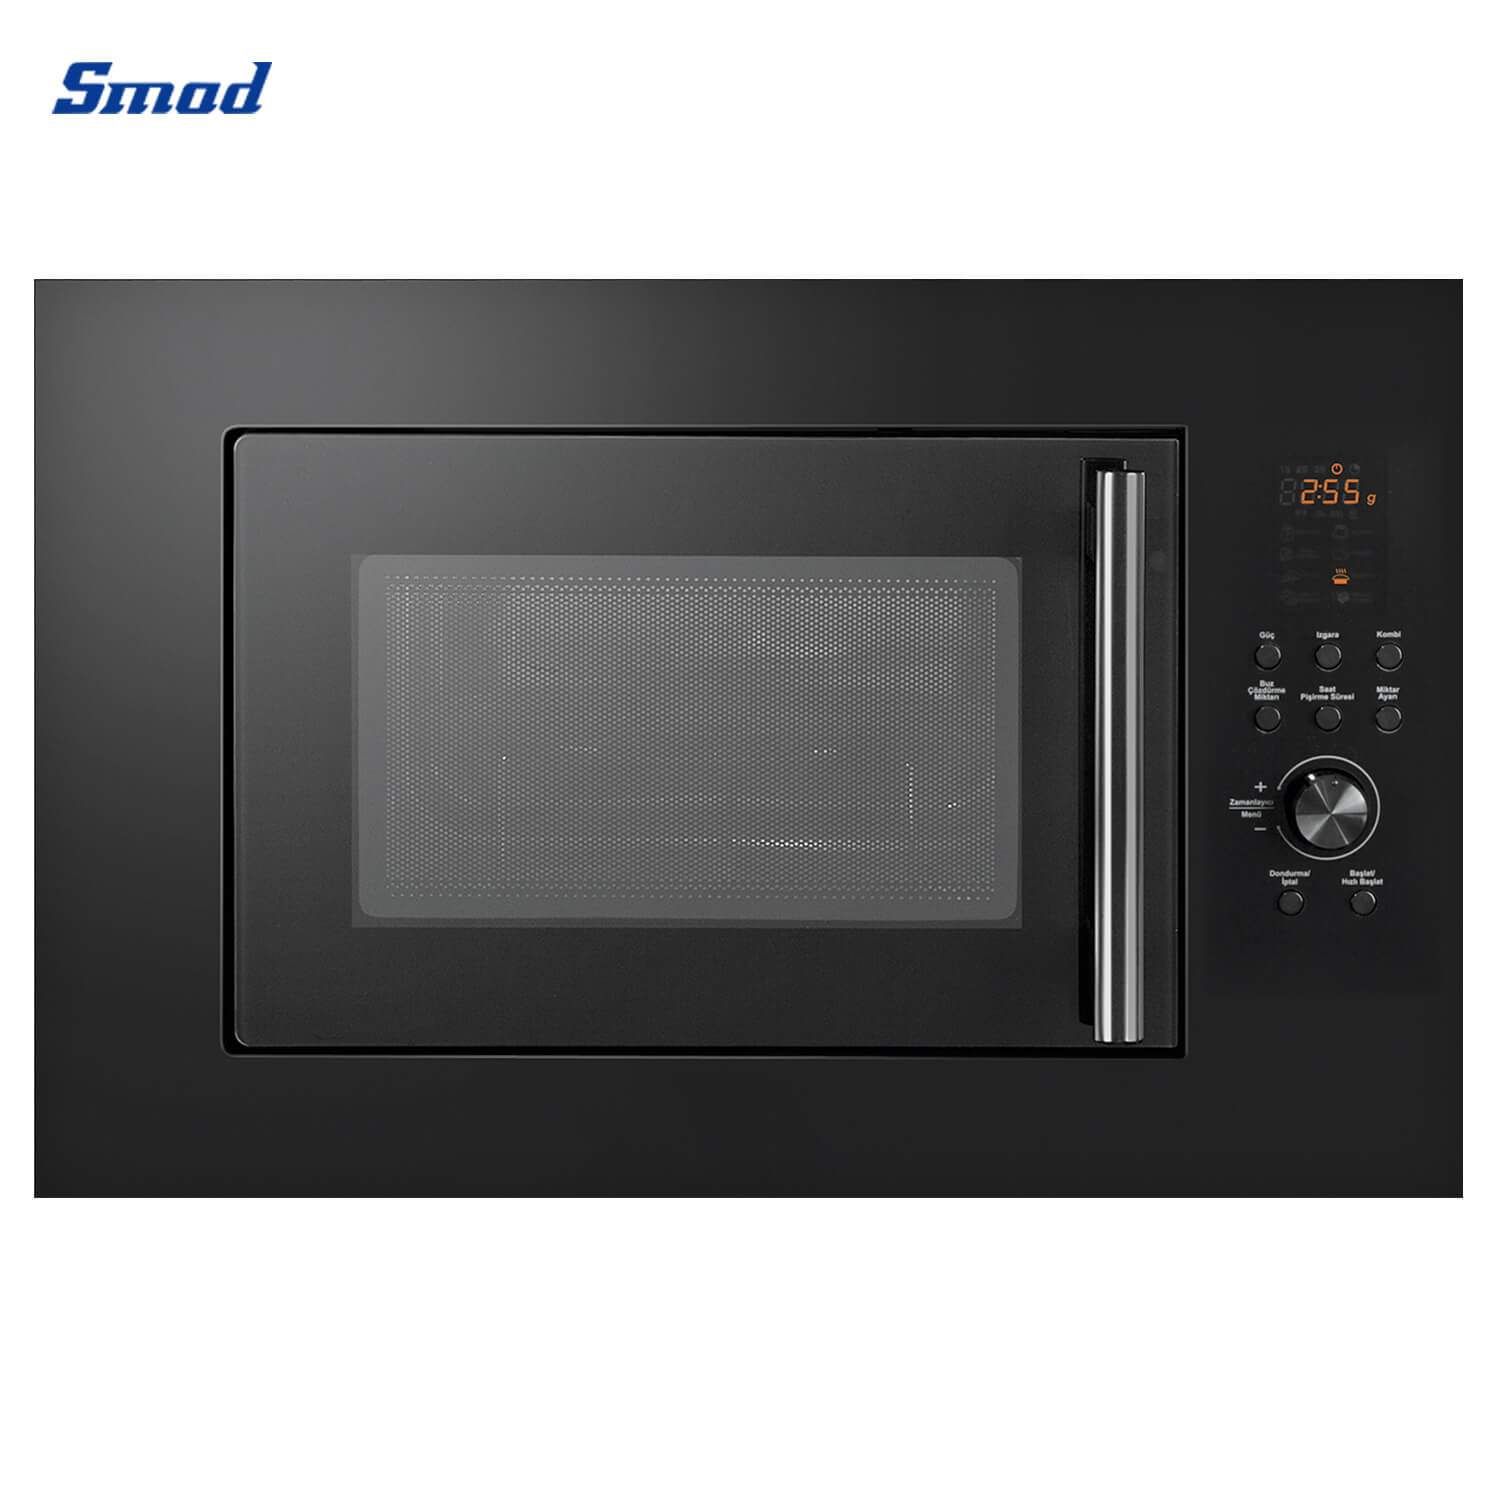 Smad 23L 900W Built-In Microwave Oven with 6 Microwave Power Levels